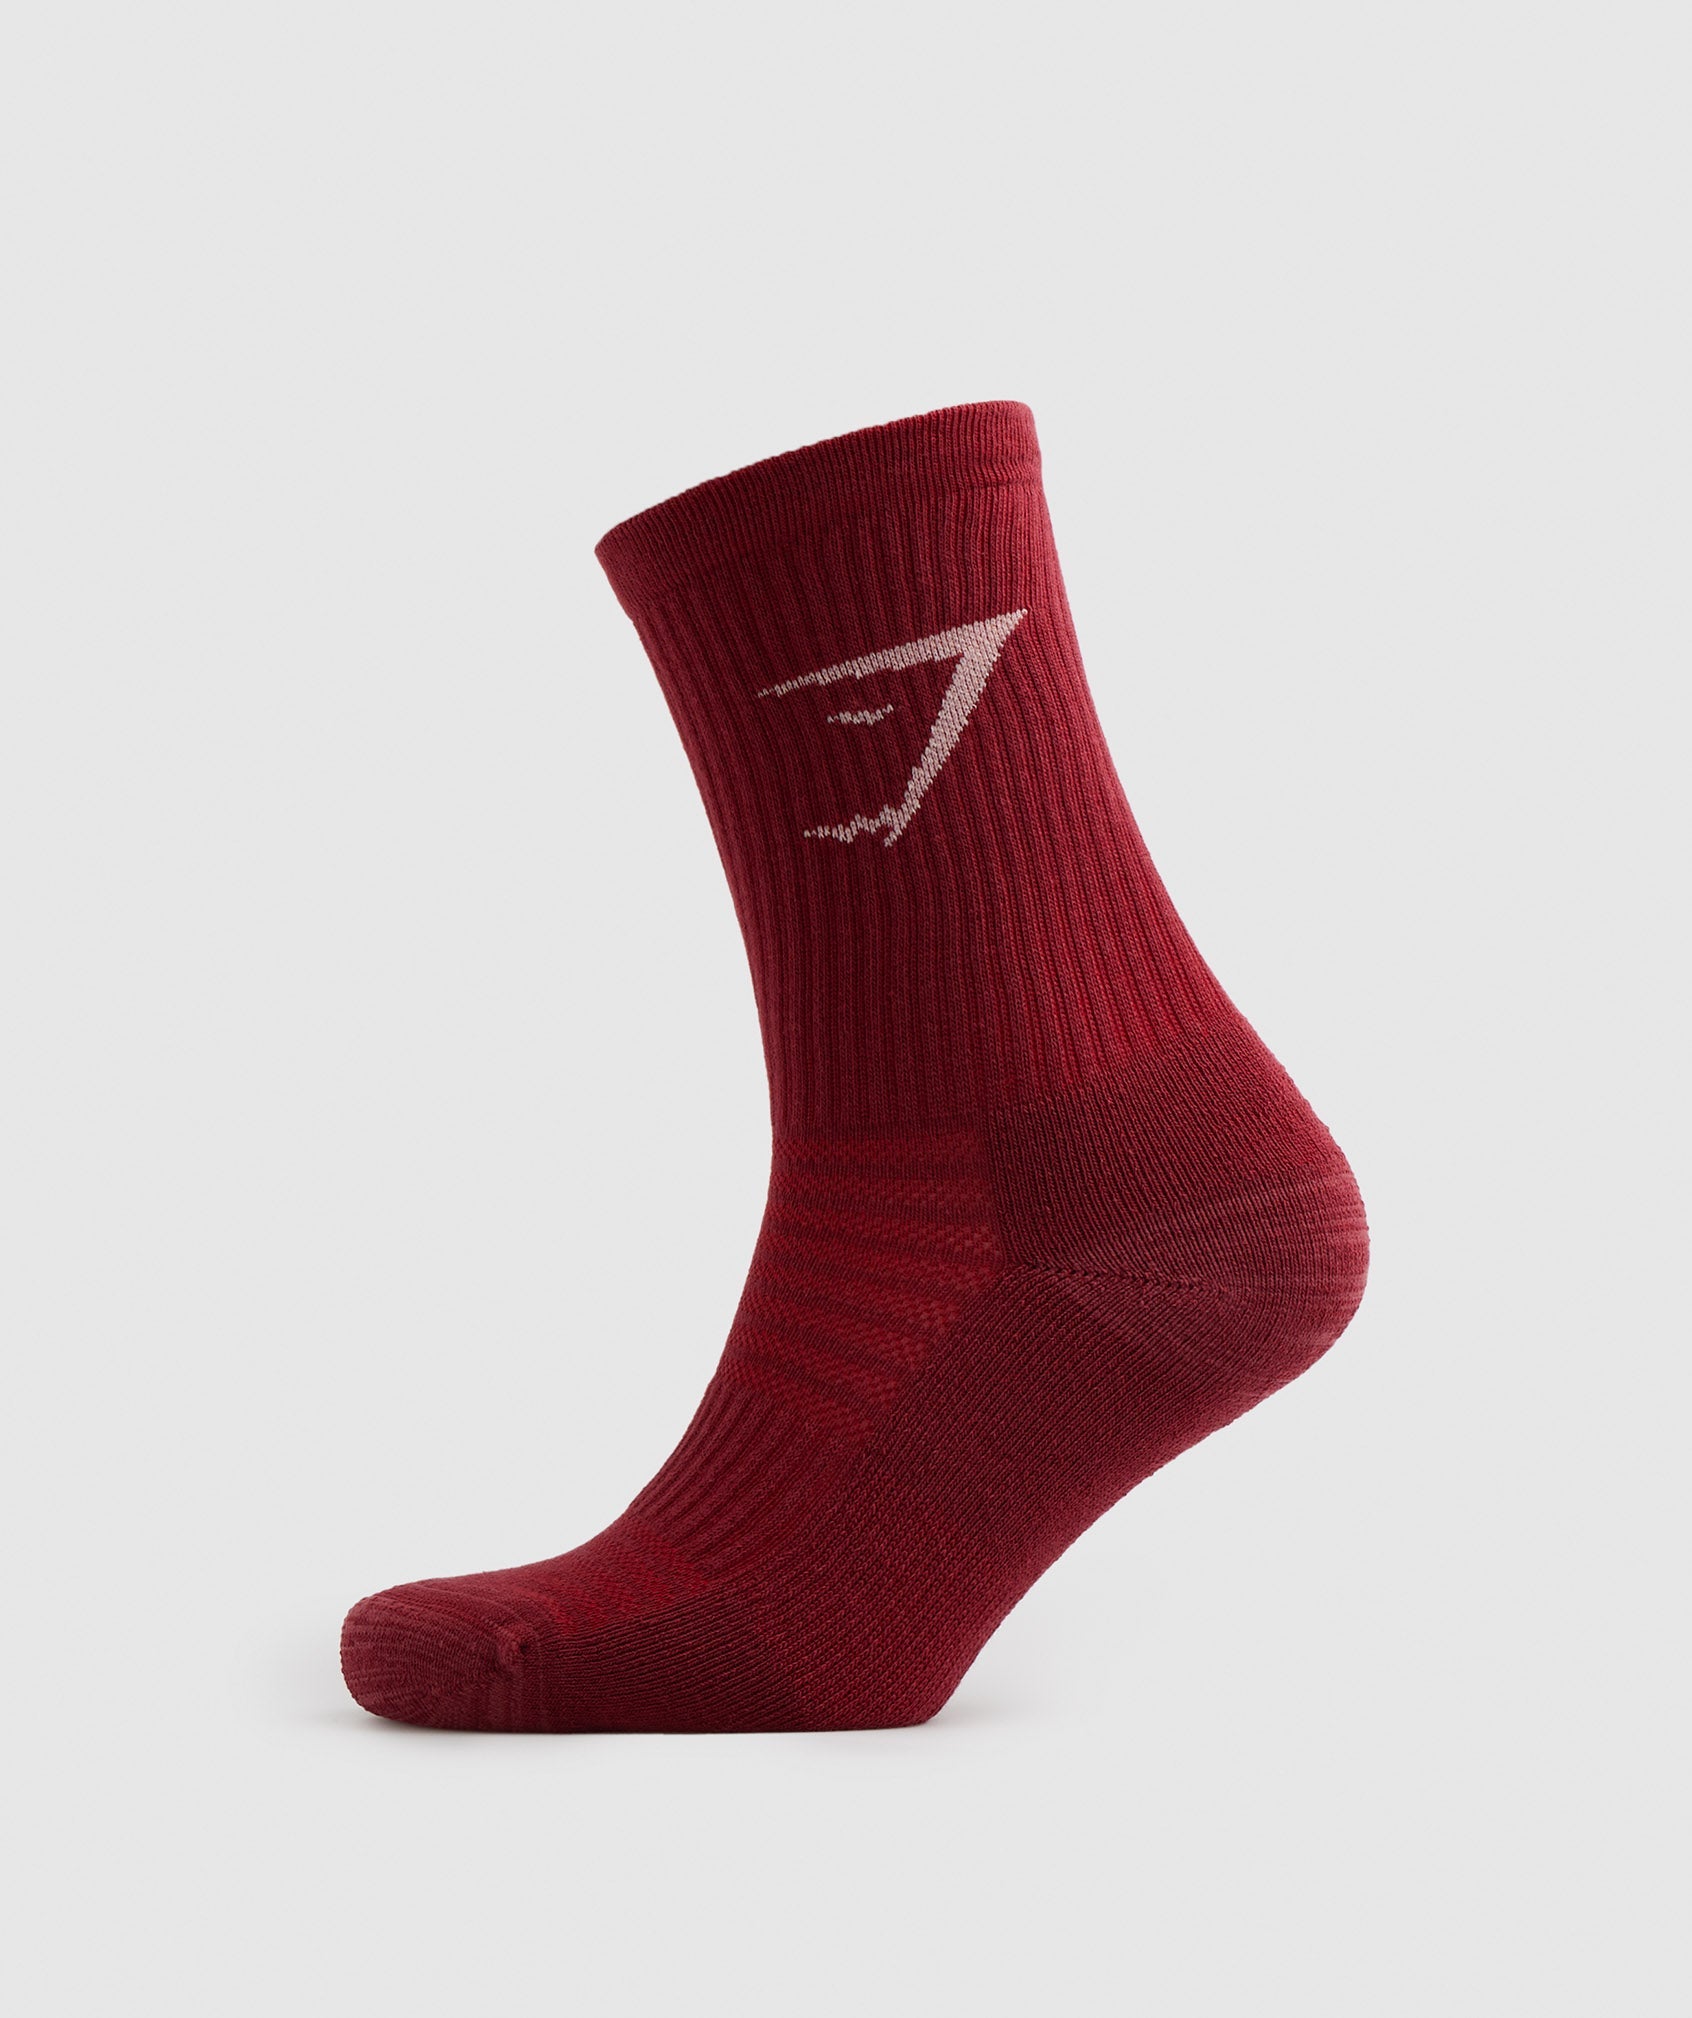 Crew Socks 3pk in White/Pink/Red - view 5